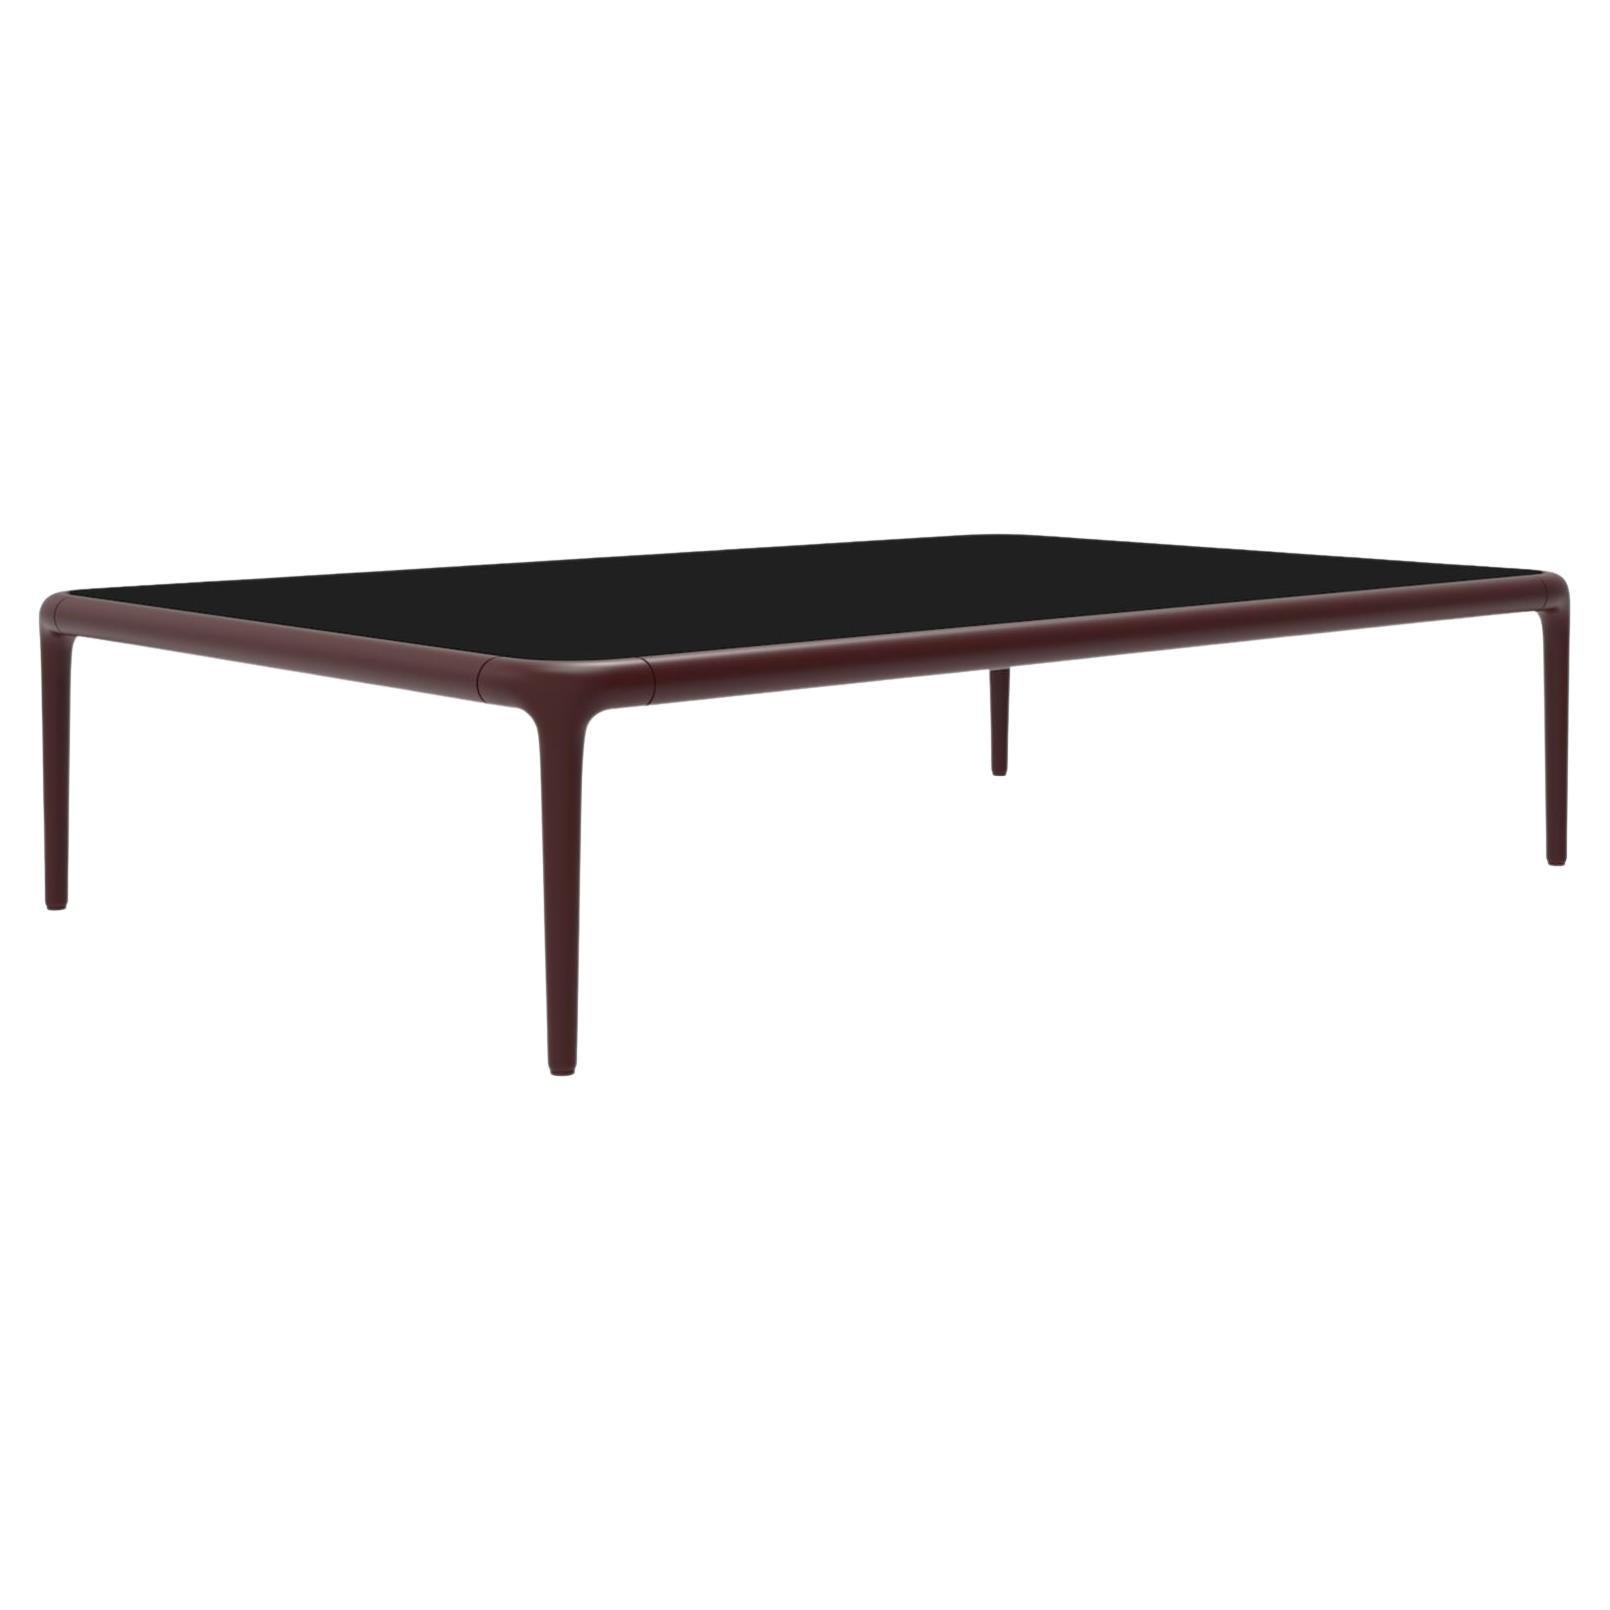 Xaloc Burgundy Coffee Table 120 with Glass Top by Mowee For Sale